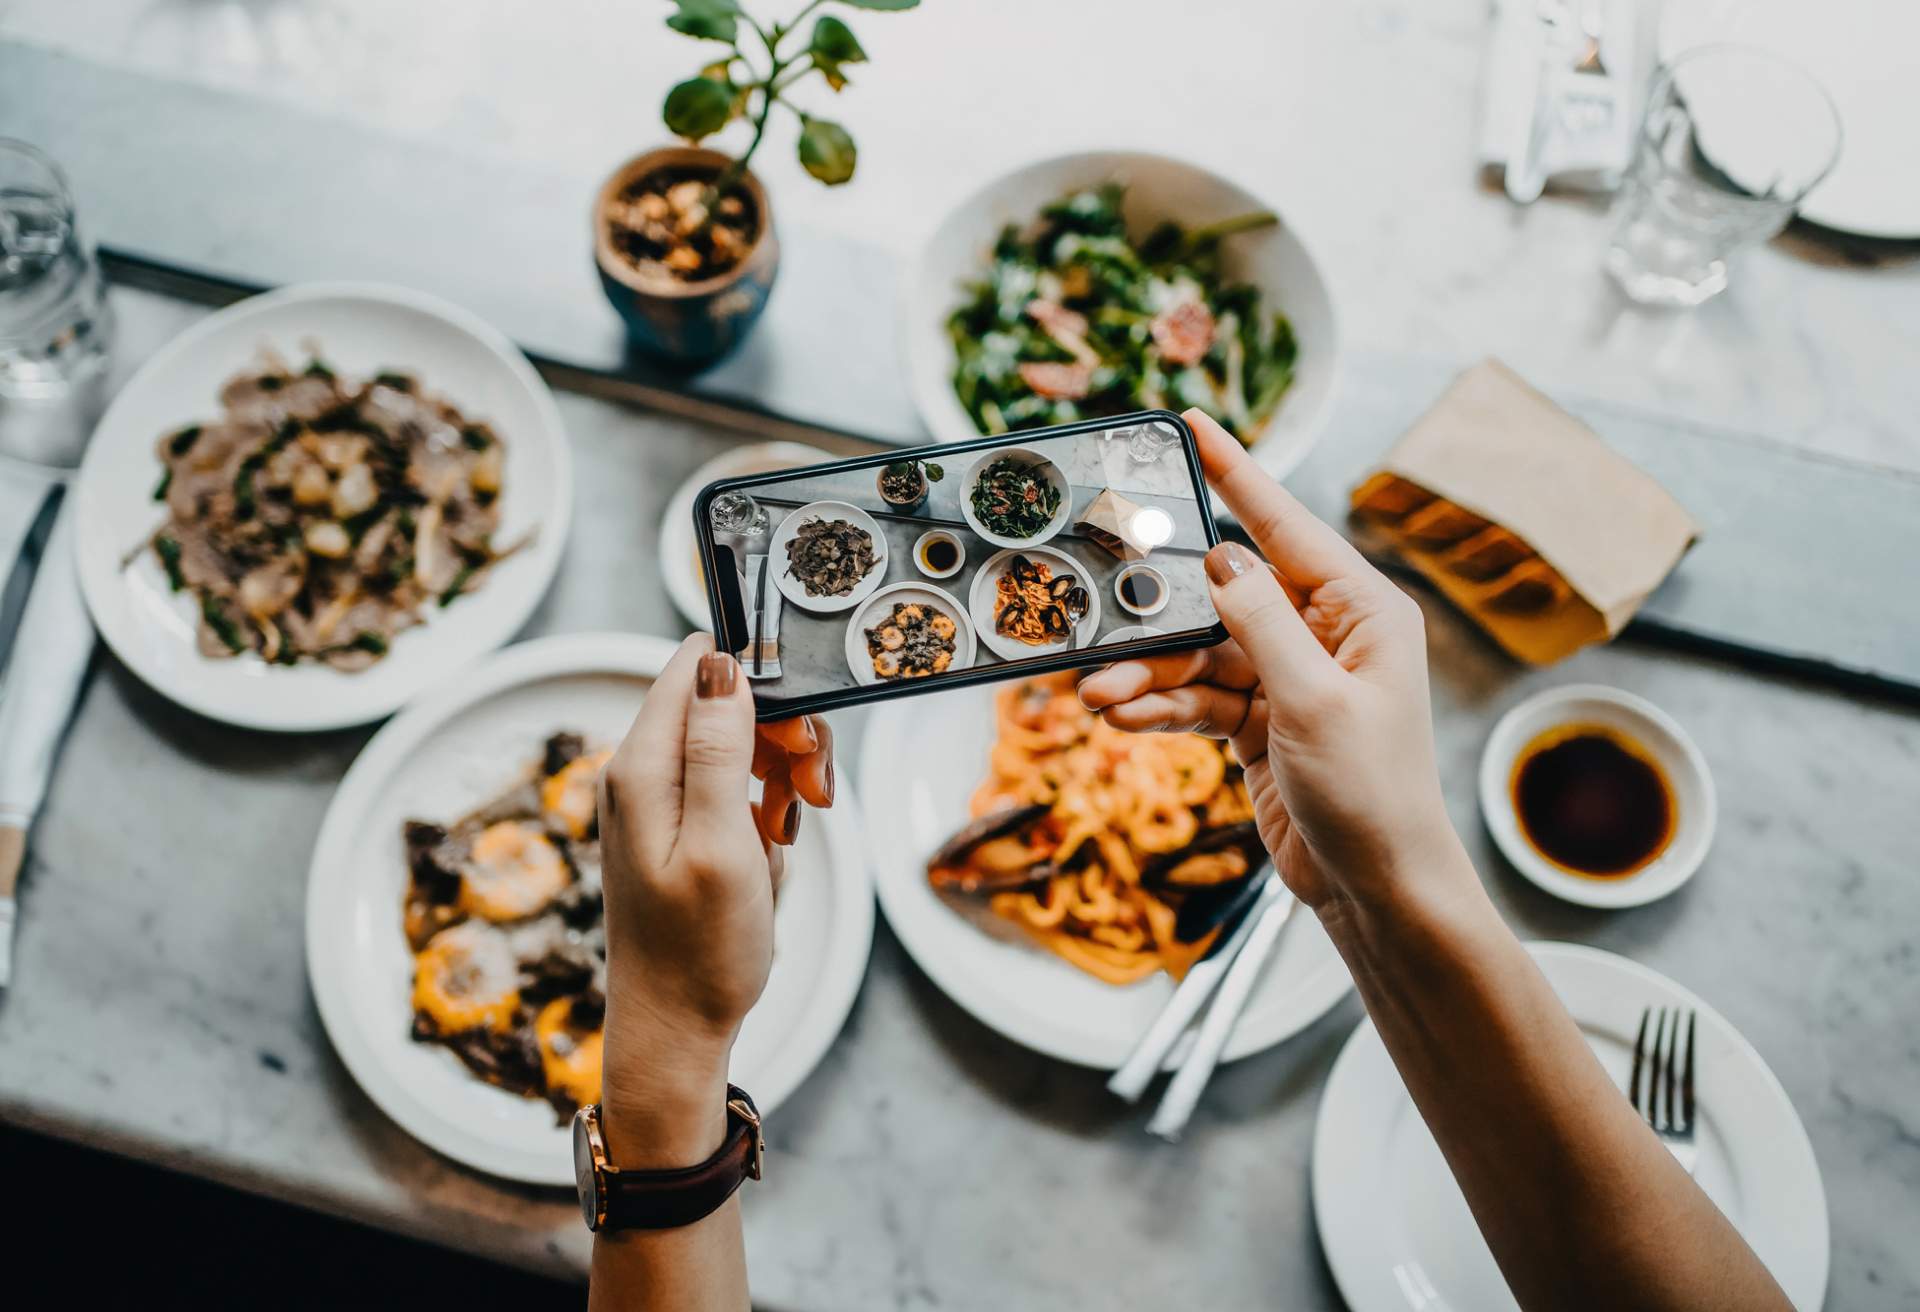 A phone poised over a restaurant table full of dishes takes a photo